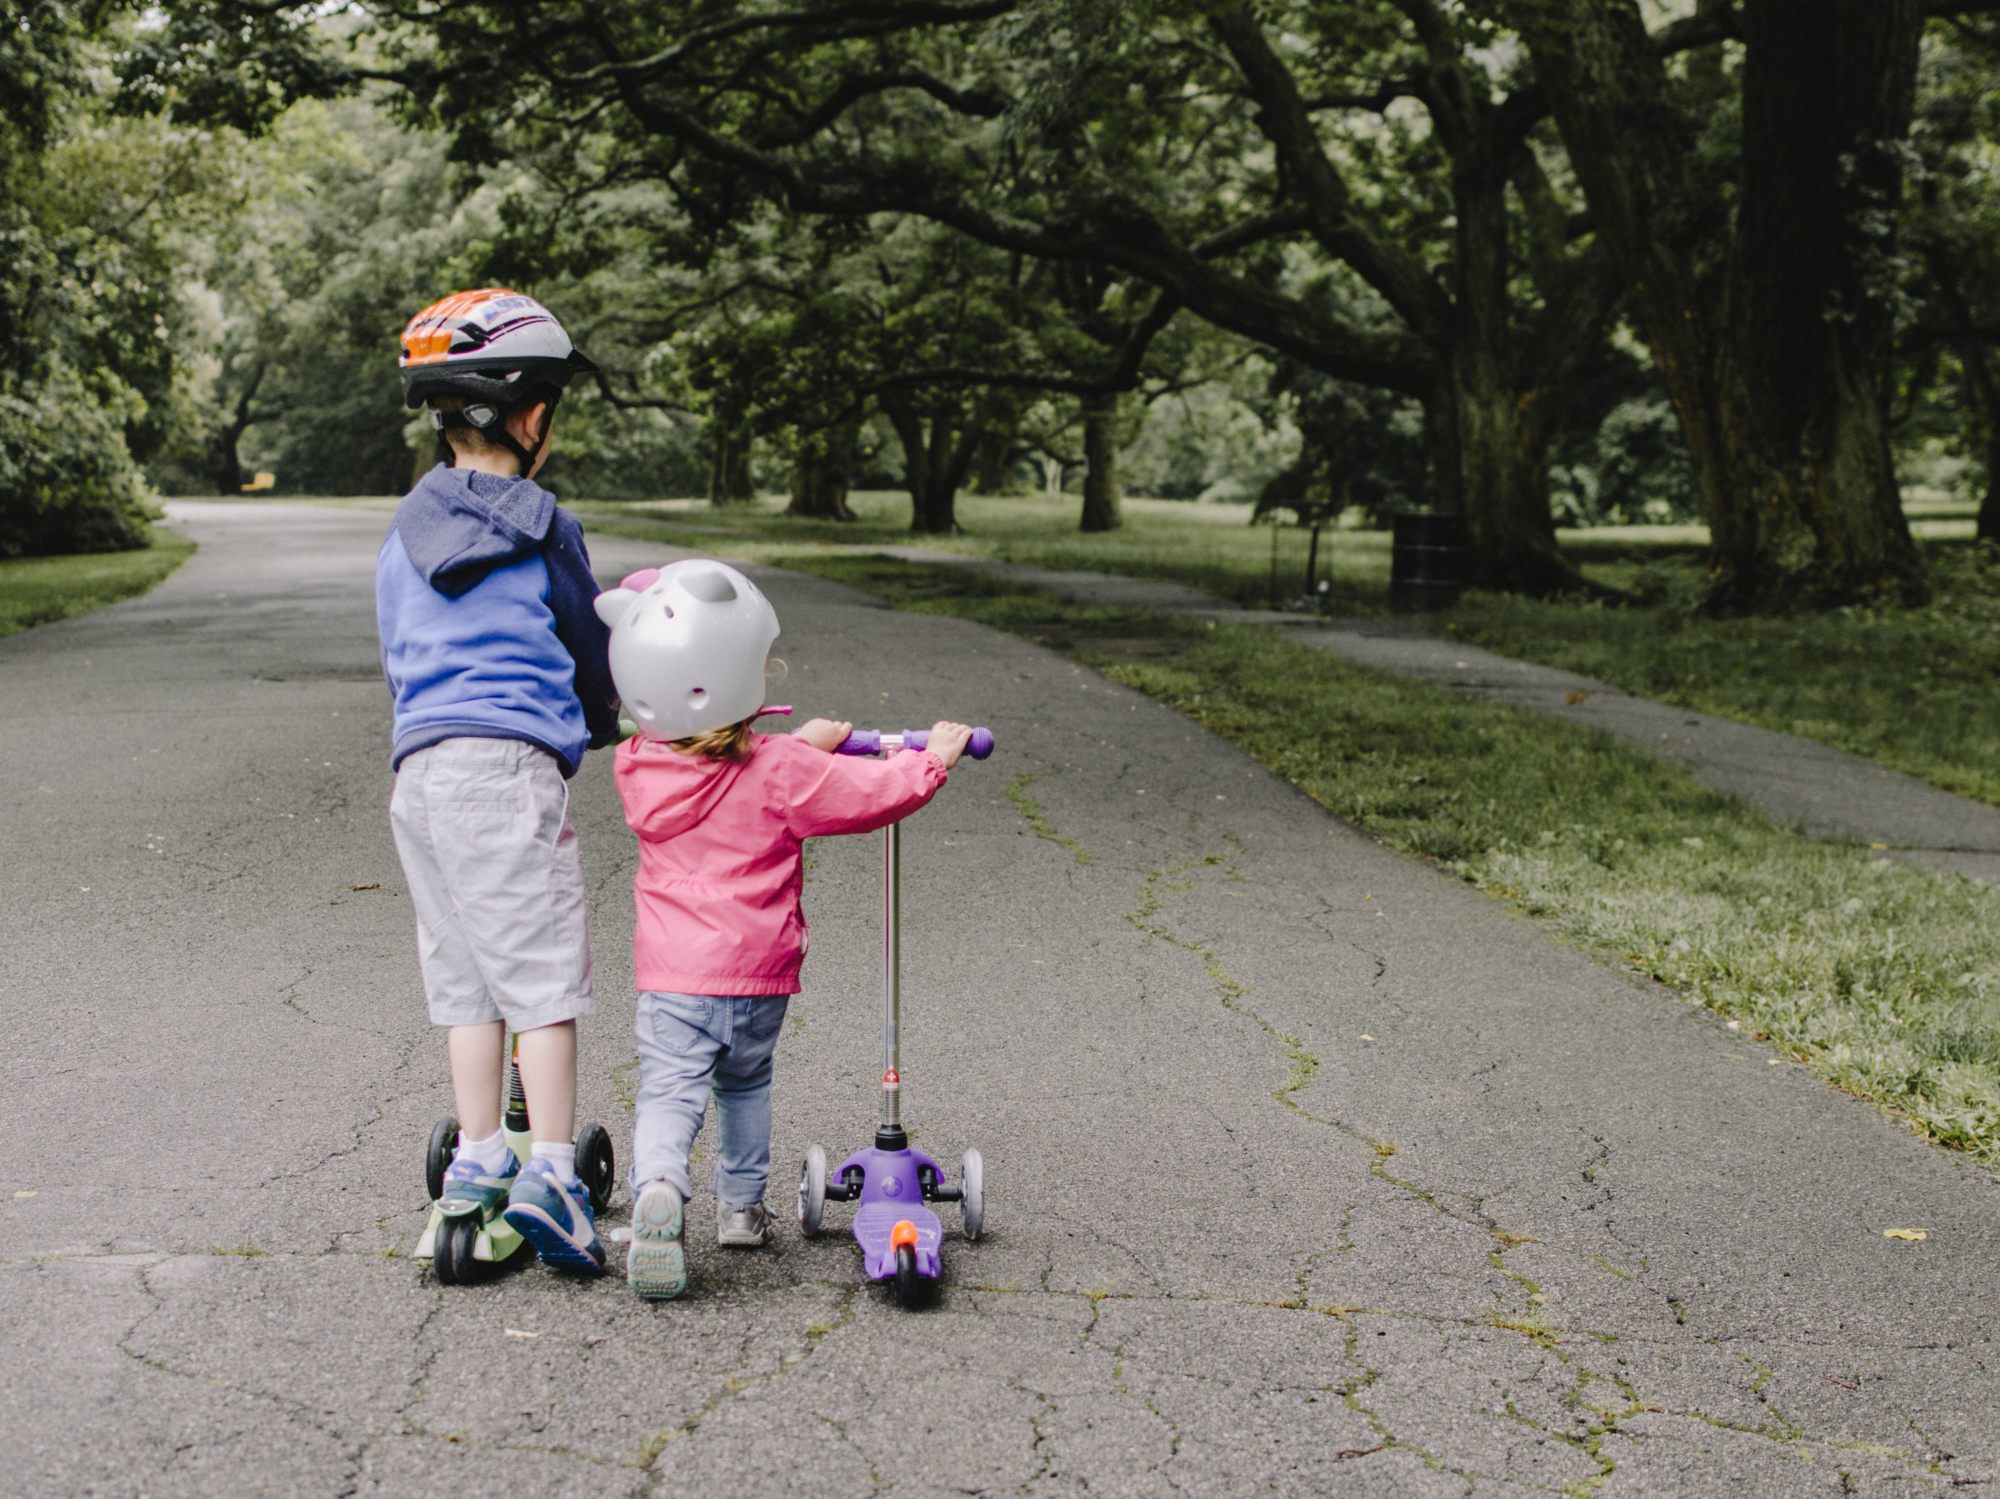 Children riding scooters wearing helmets for safety